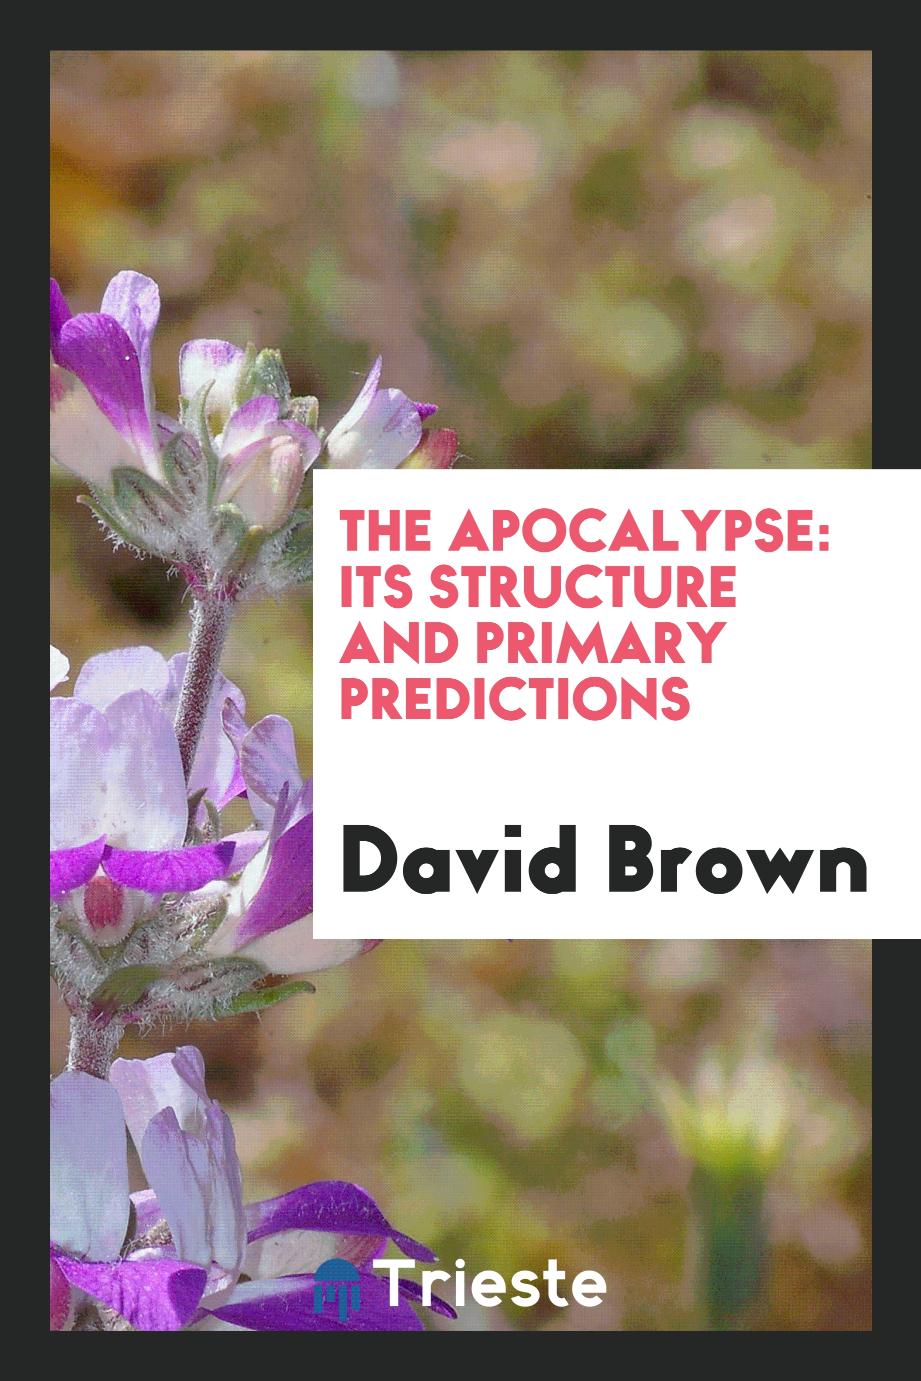 The Apocalypse: its structure and primary predictions